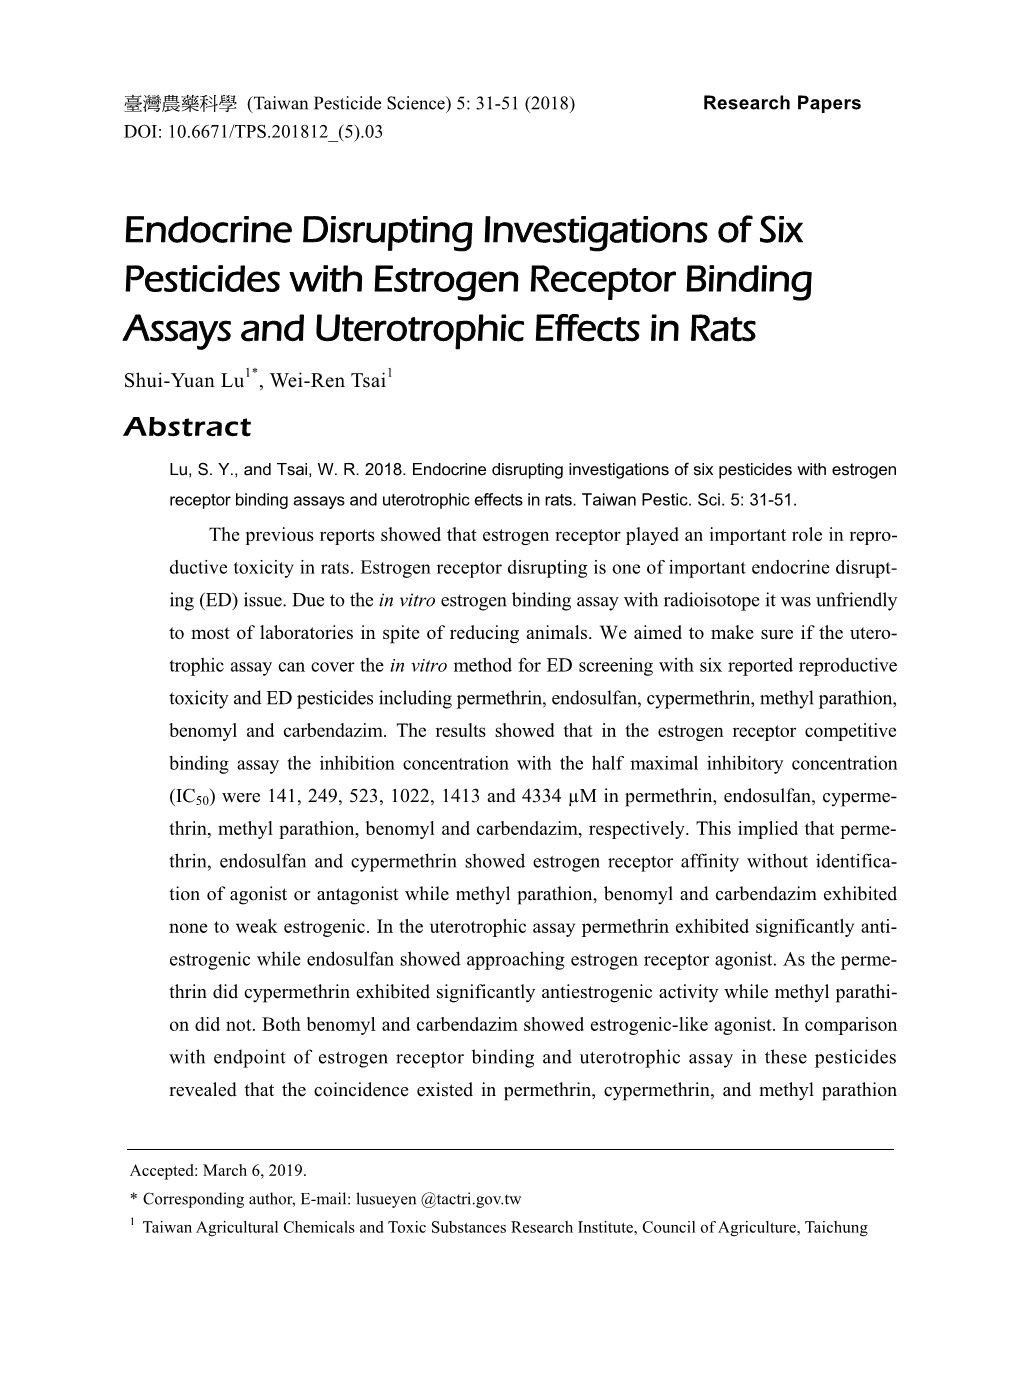 Endocrine Disrupting Investigations of Six Pesticides with Estrogen Receptor Binding Assays and Uterotrophic Effects in Rats